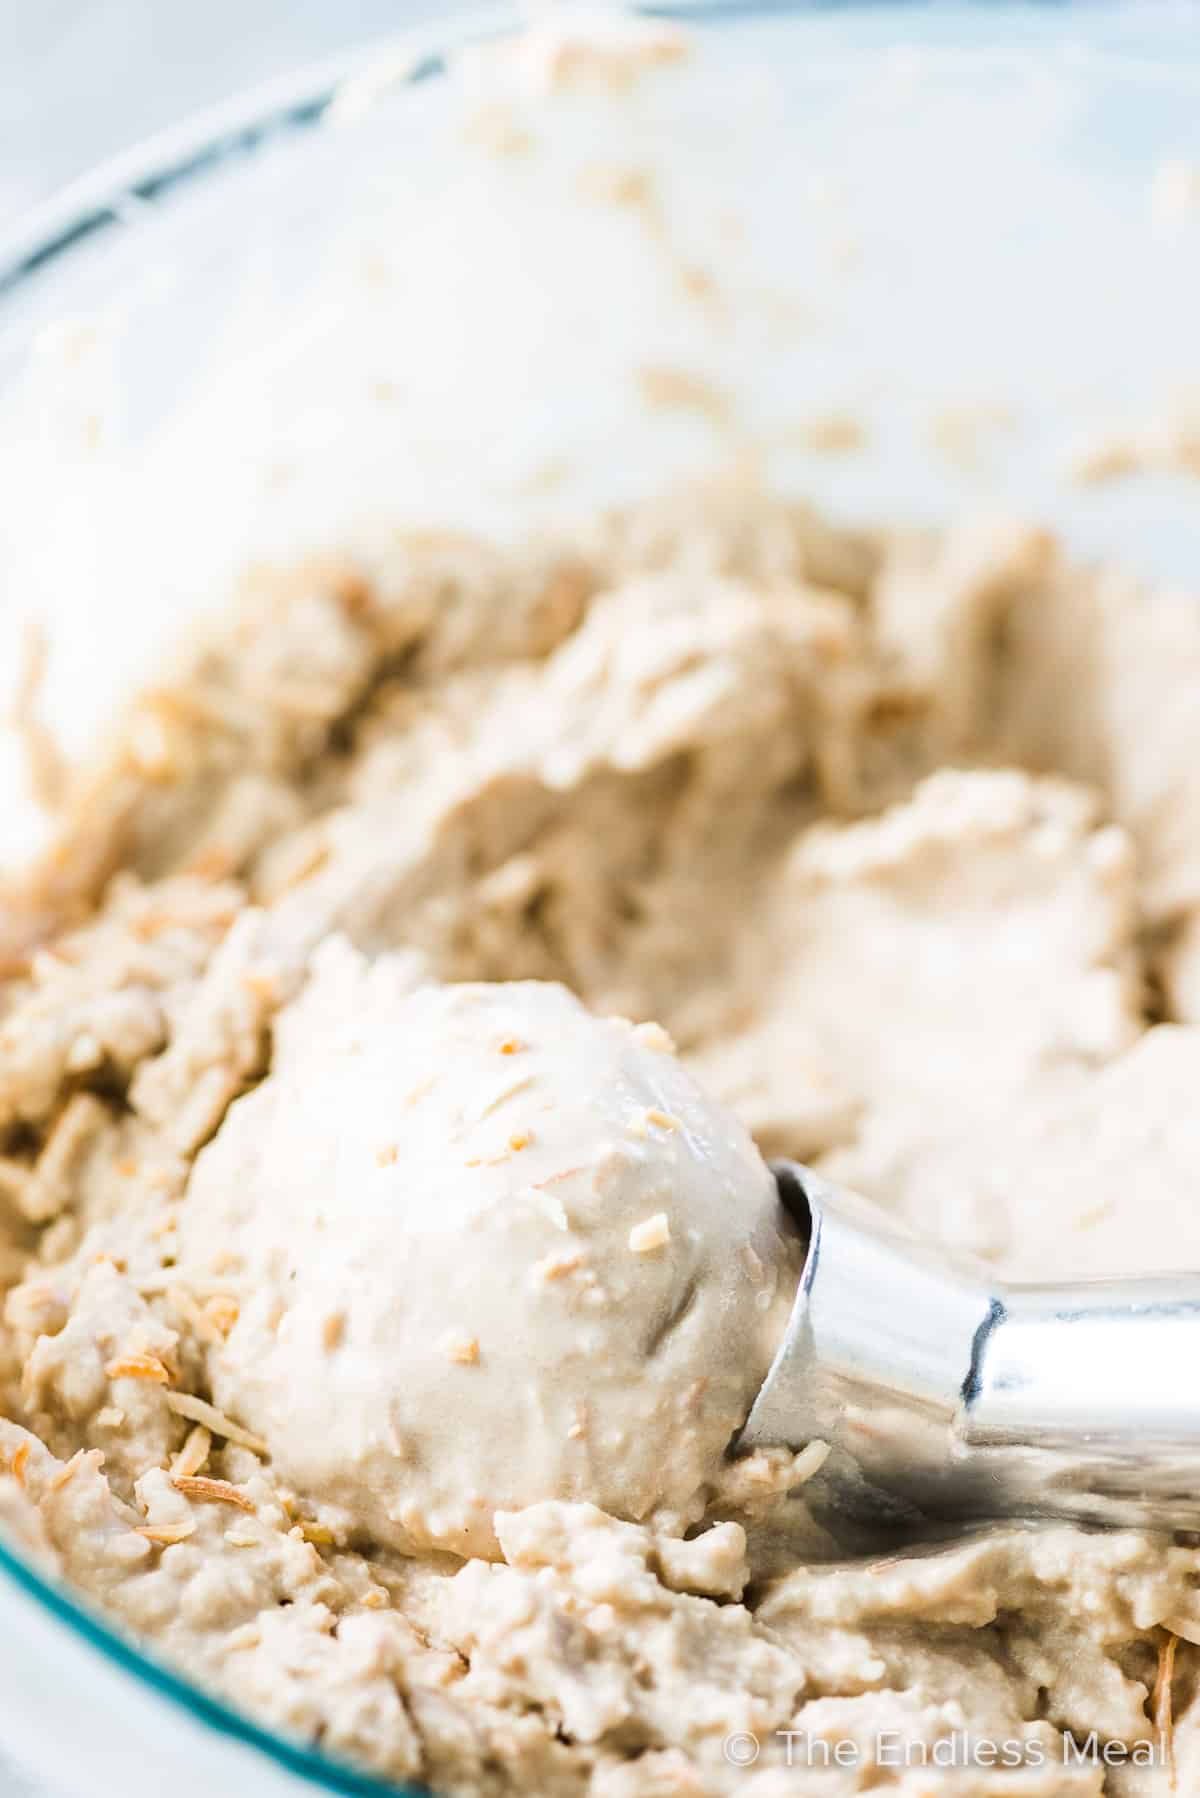 Toasted Coconut Ice Cream in a glass bowl with an ice cream scoop taking a scoop.